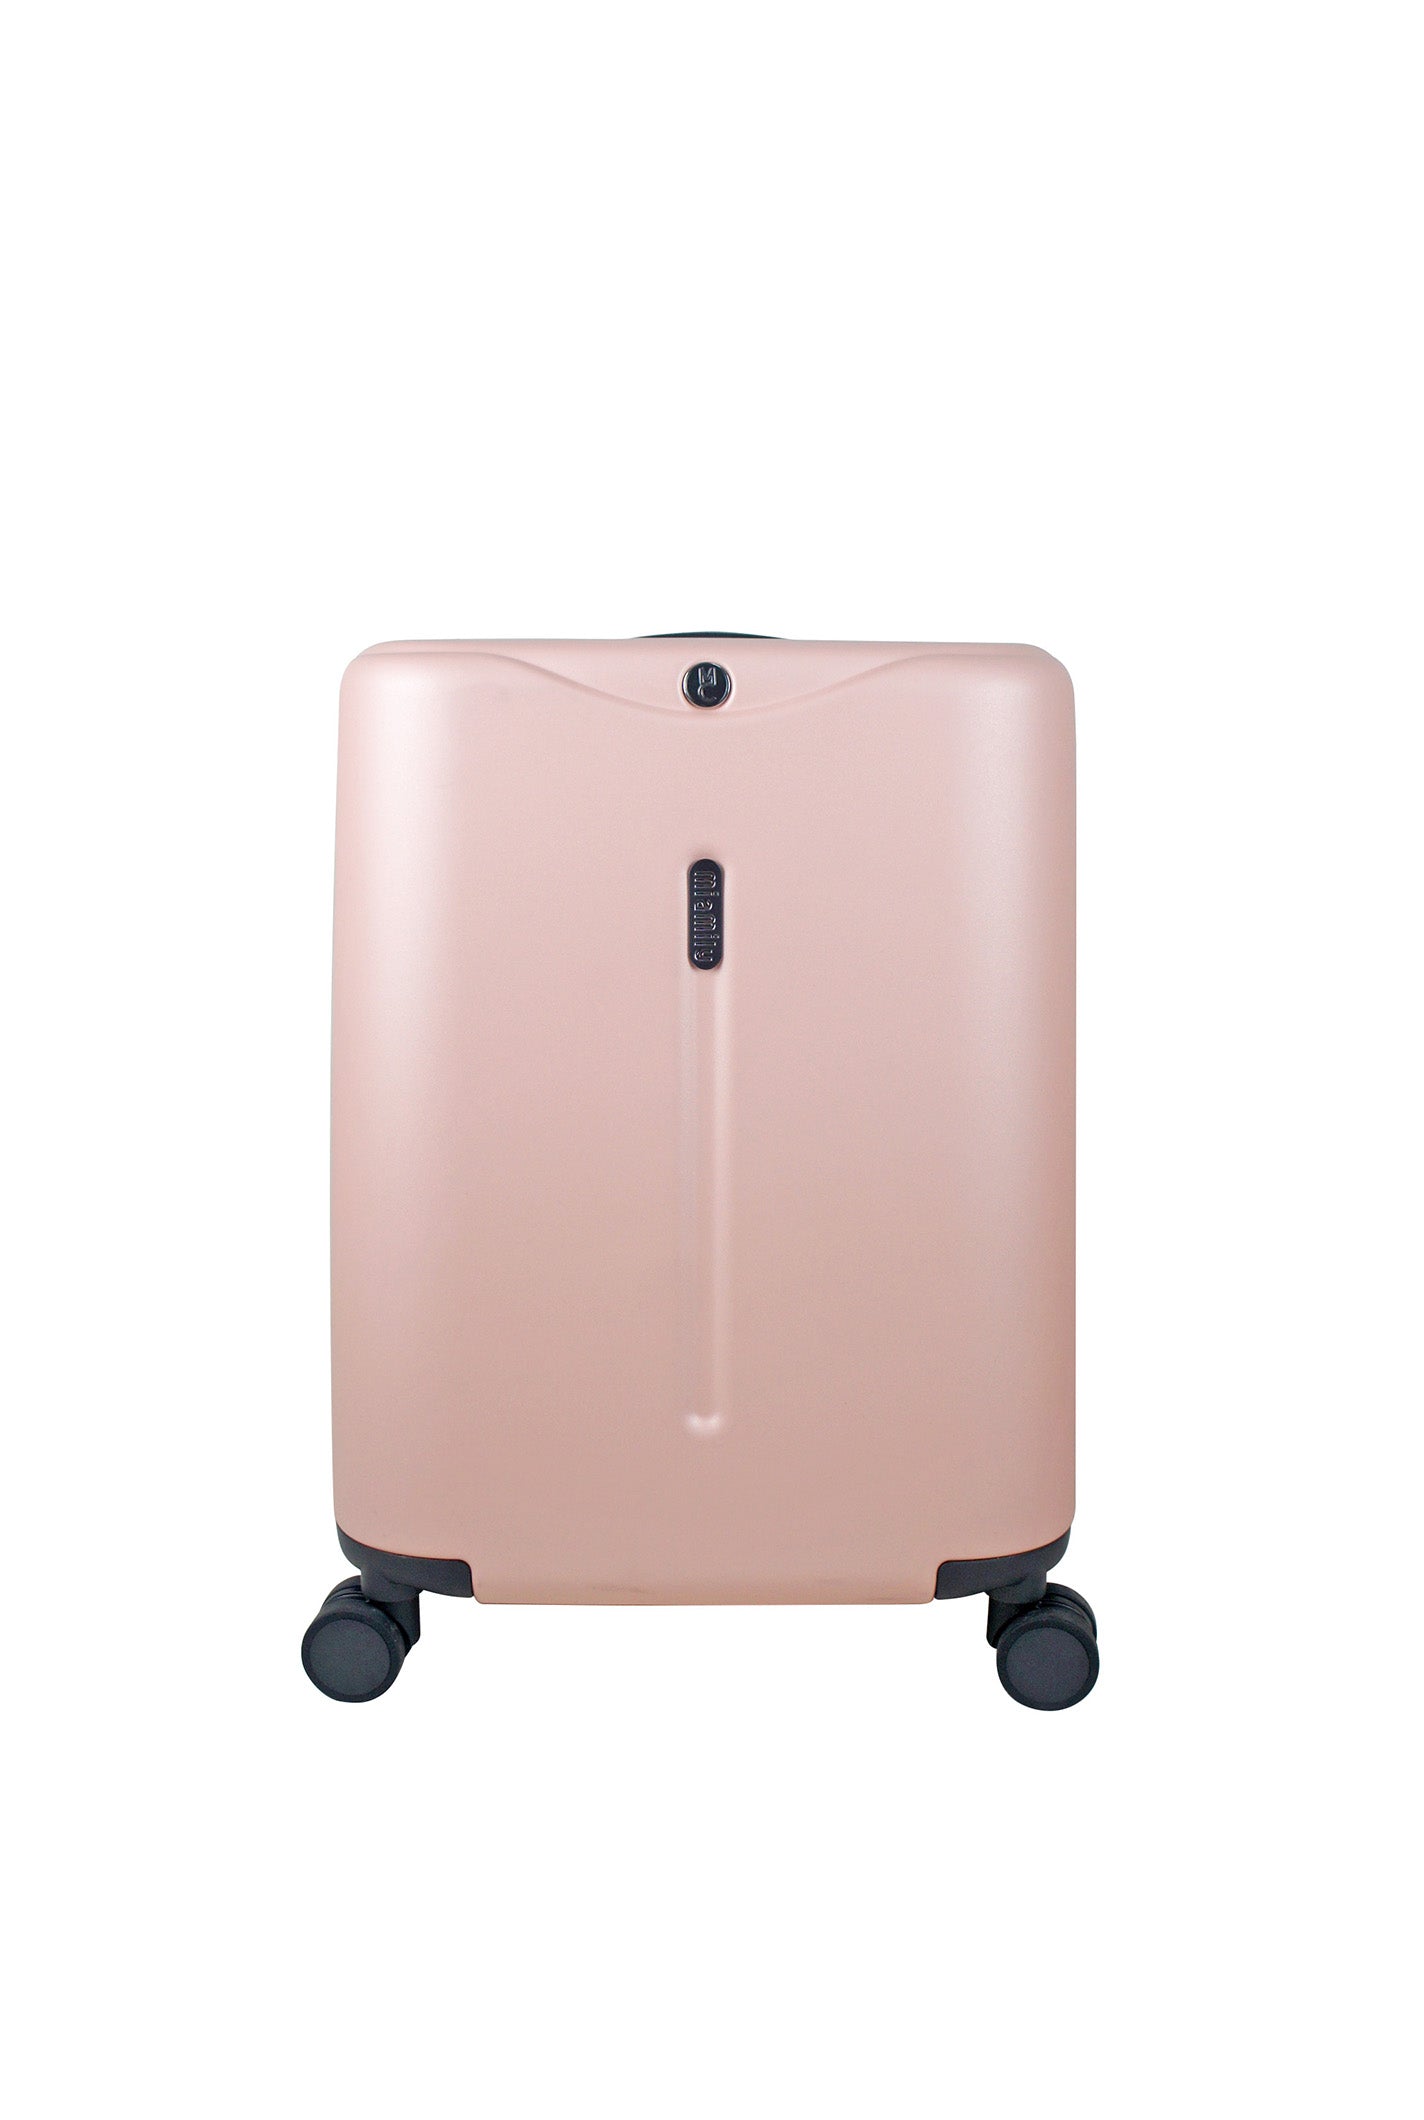 miamily luggage 18 inch pink